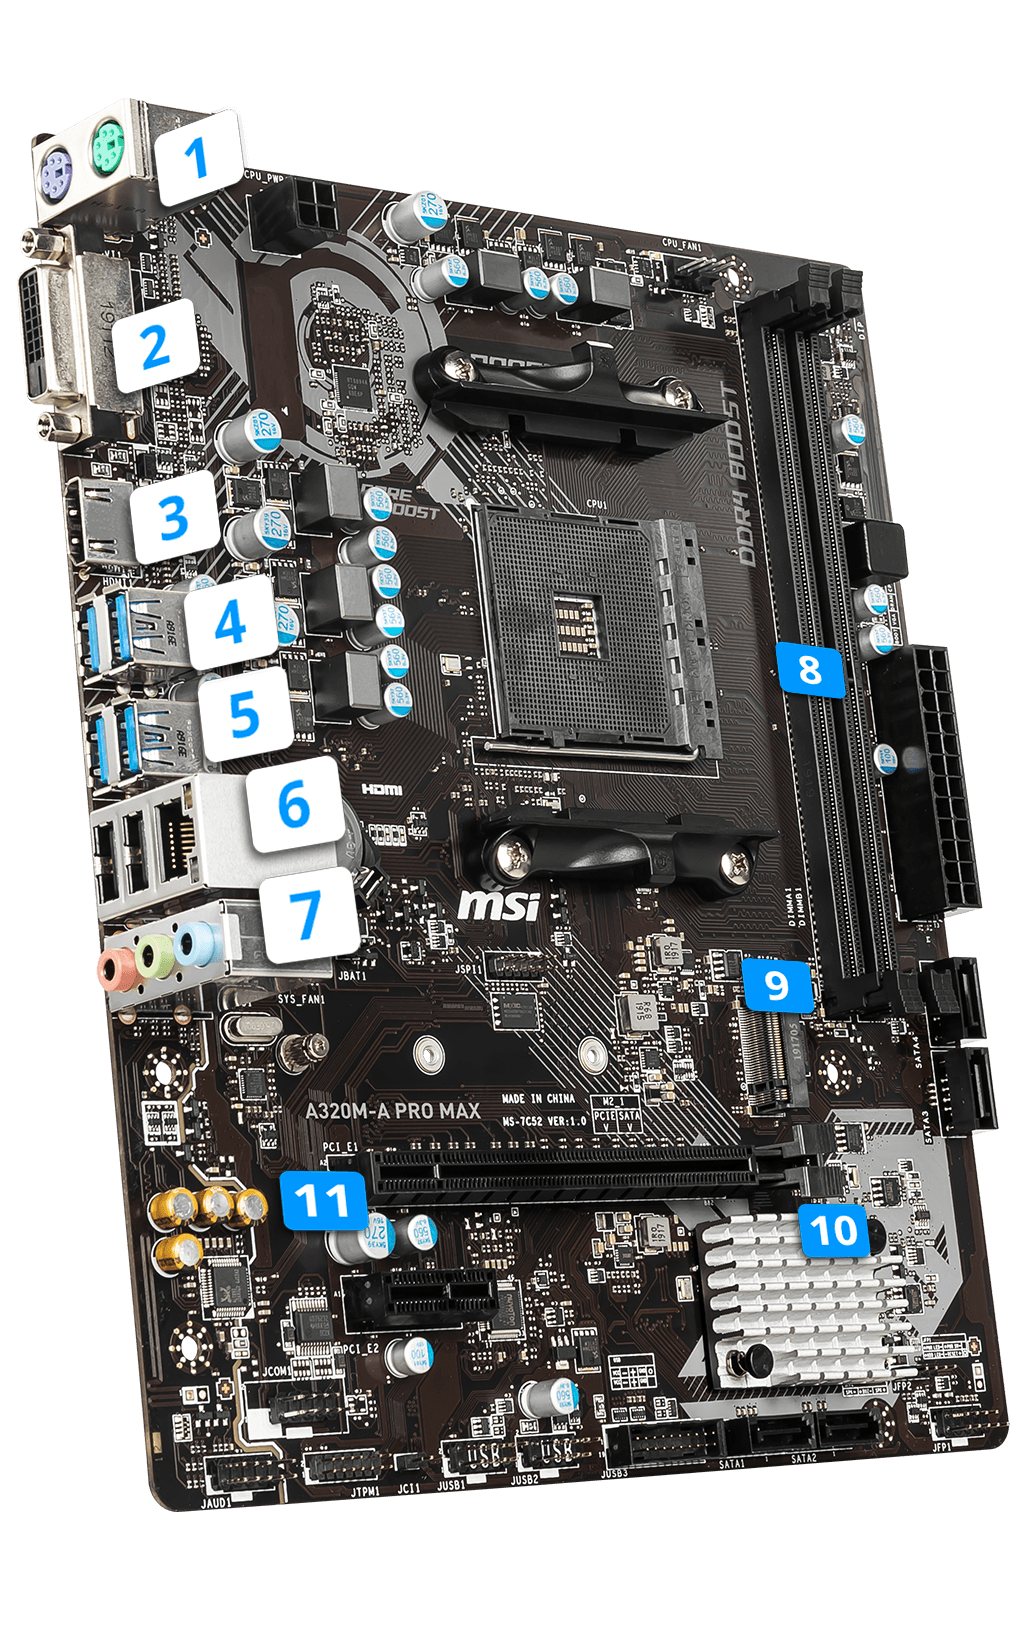 MSI A320M-A PRO MAX overview